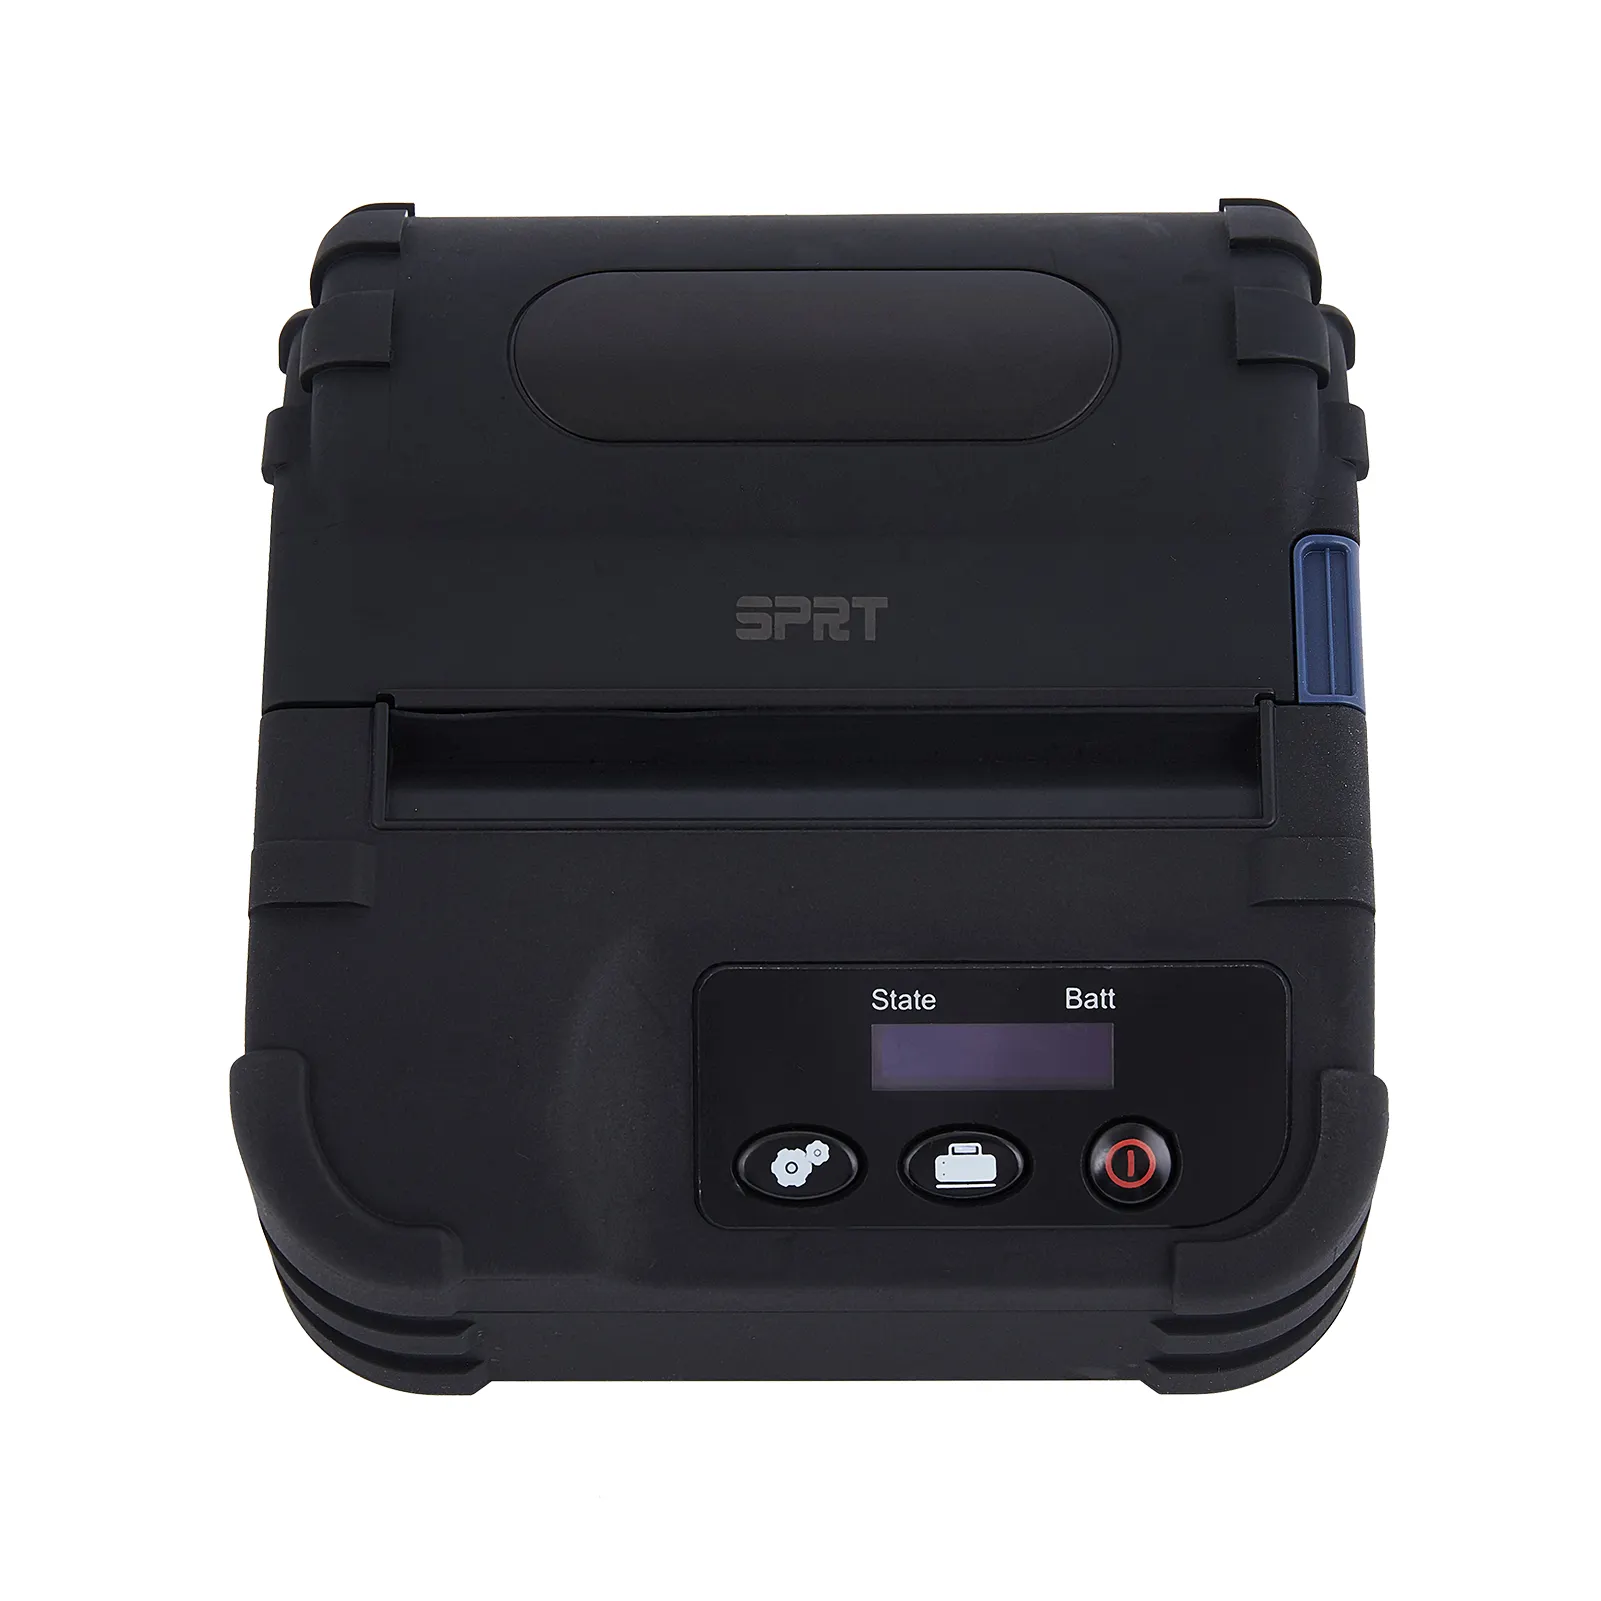 SPRT SP-L36 3inch Wireless Portable Receipt, Label and Ticket Direct Thermal Mobile Printer Android Printer Portable Printer